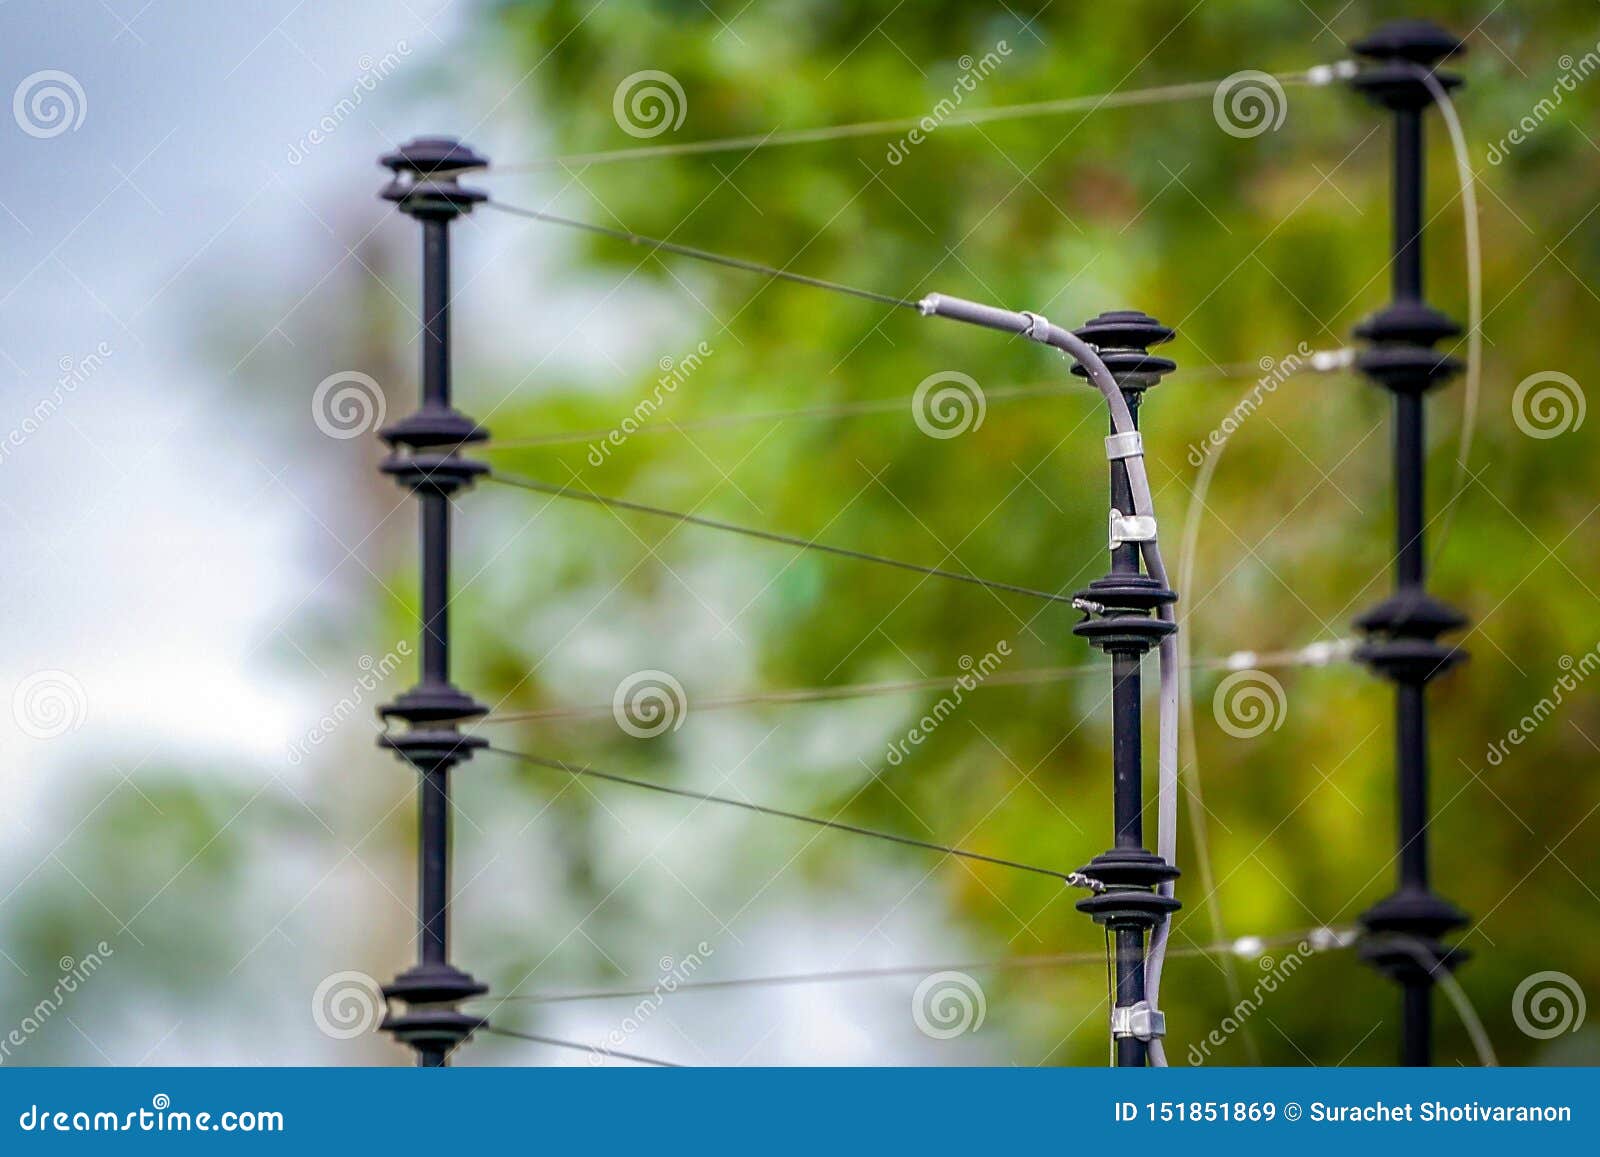 93 756 Blur Green Tree Background Photos Free Royalty Free Stock Photos From Dreamstime 626 x 399 jpeg 51 kb. https www dreamstime com electric shock cable pole blur green tree background image151851869